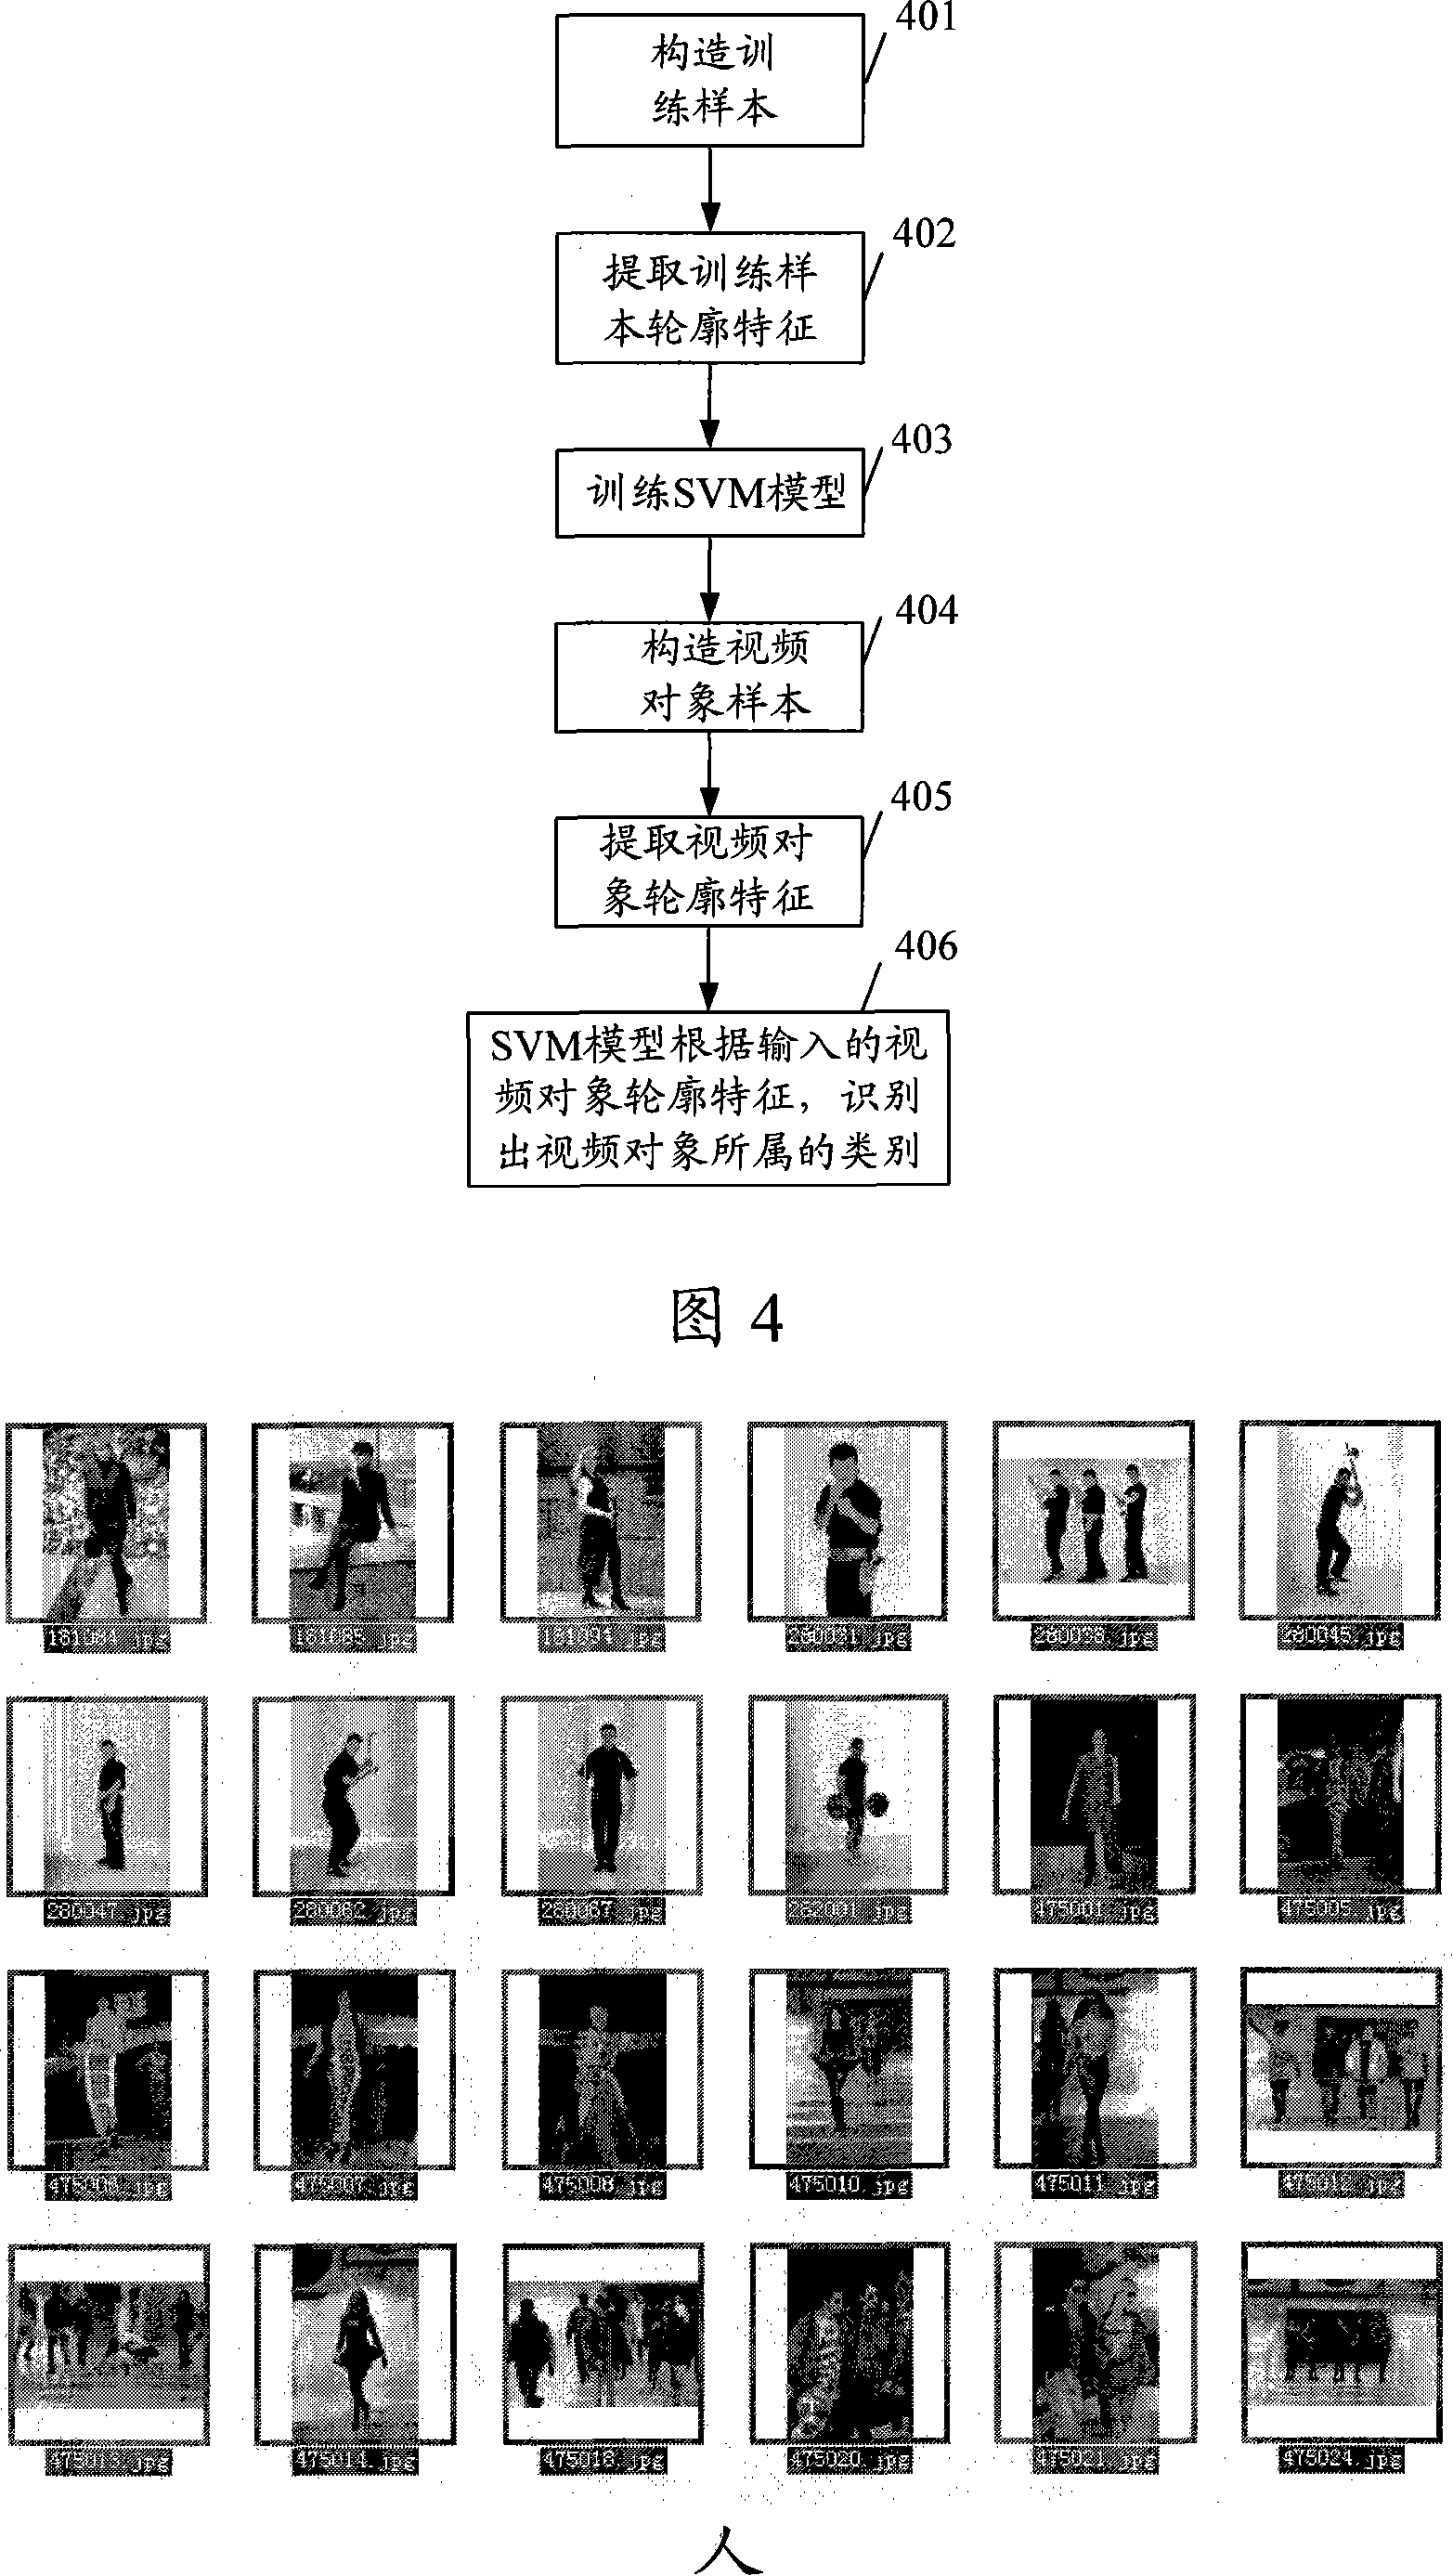 Video frequency objects recognition method and system based on supporting vectors machine